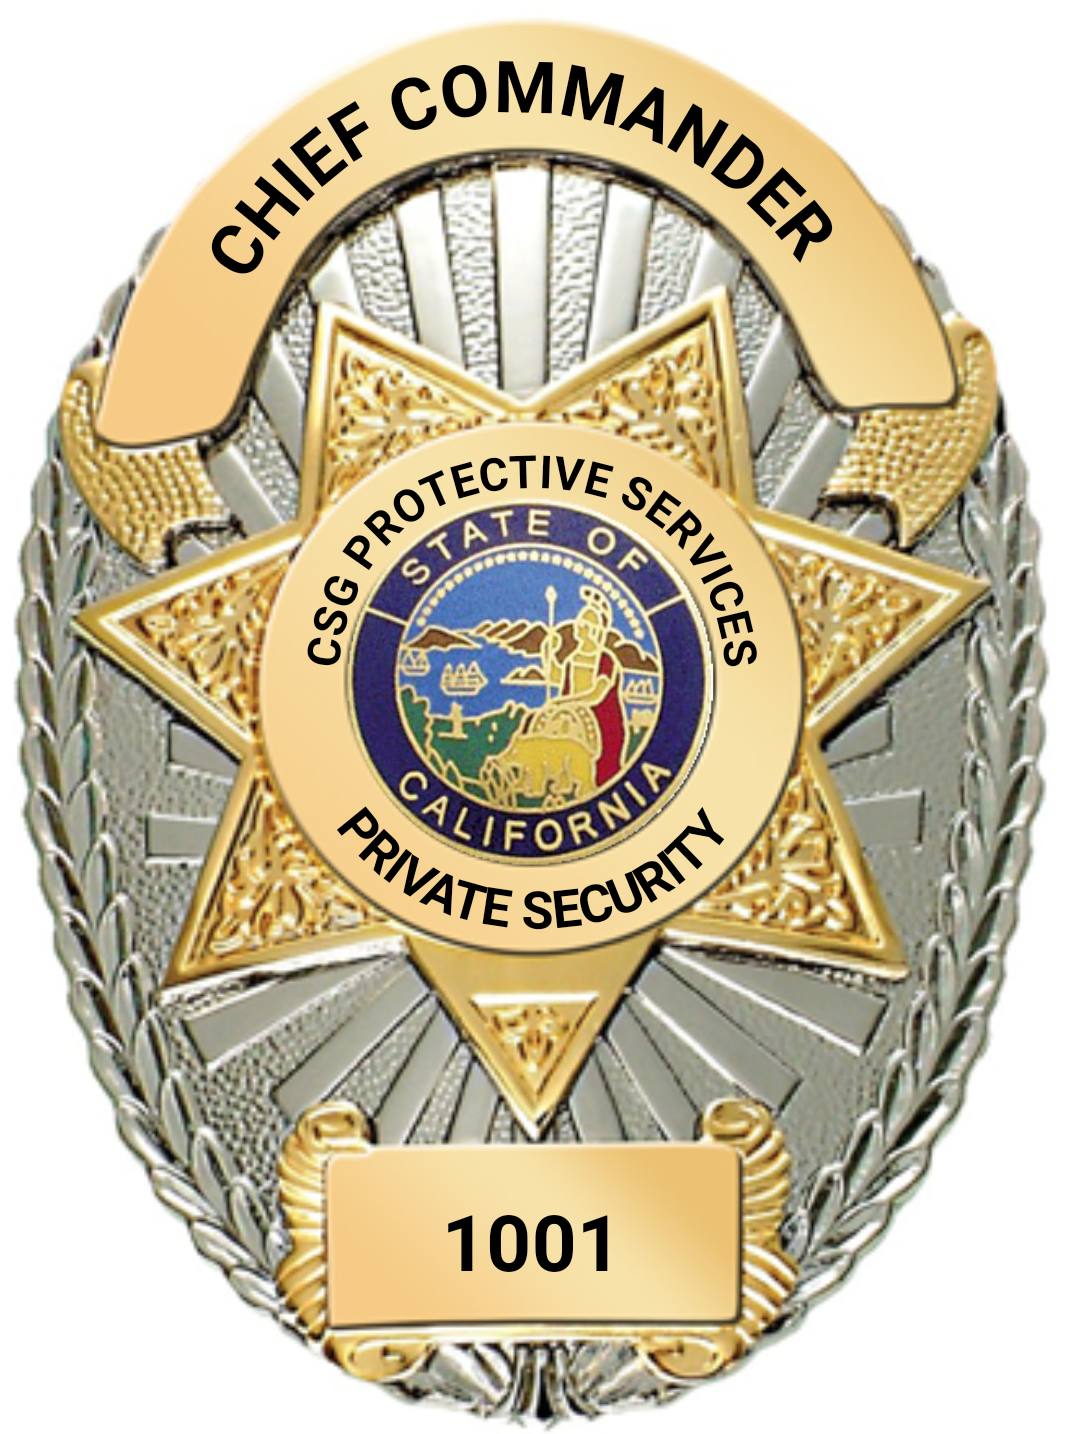 Csg Protective Services